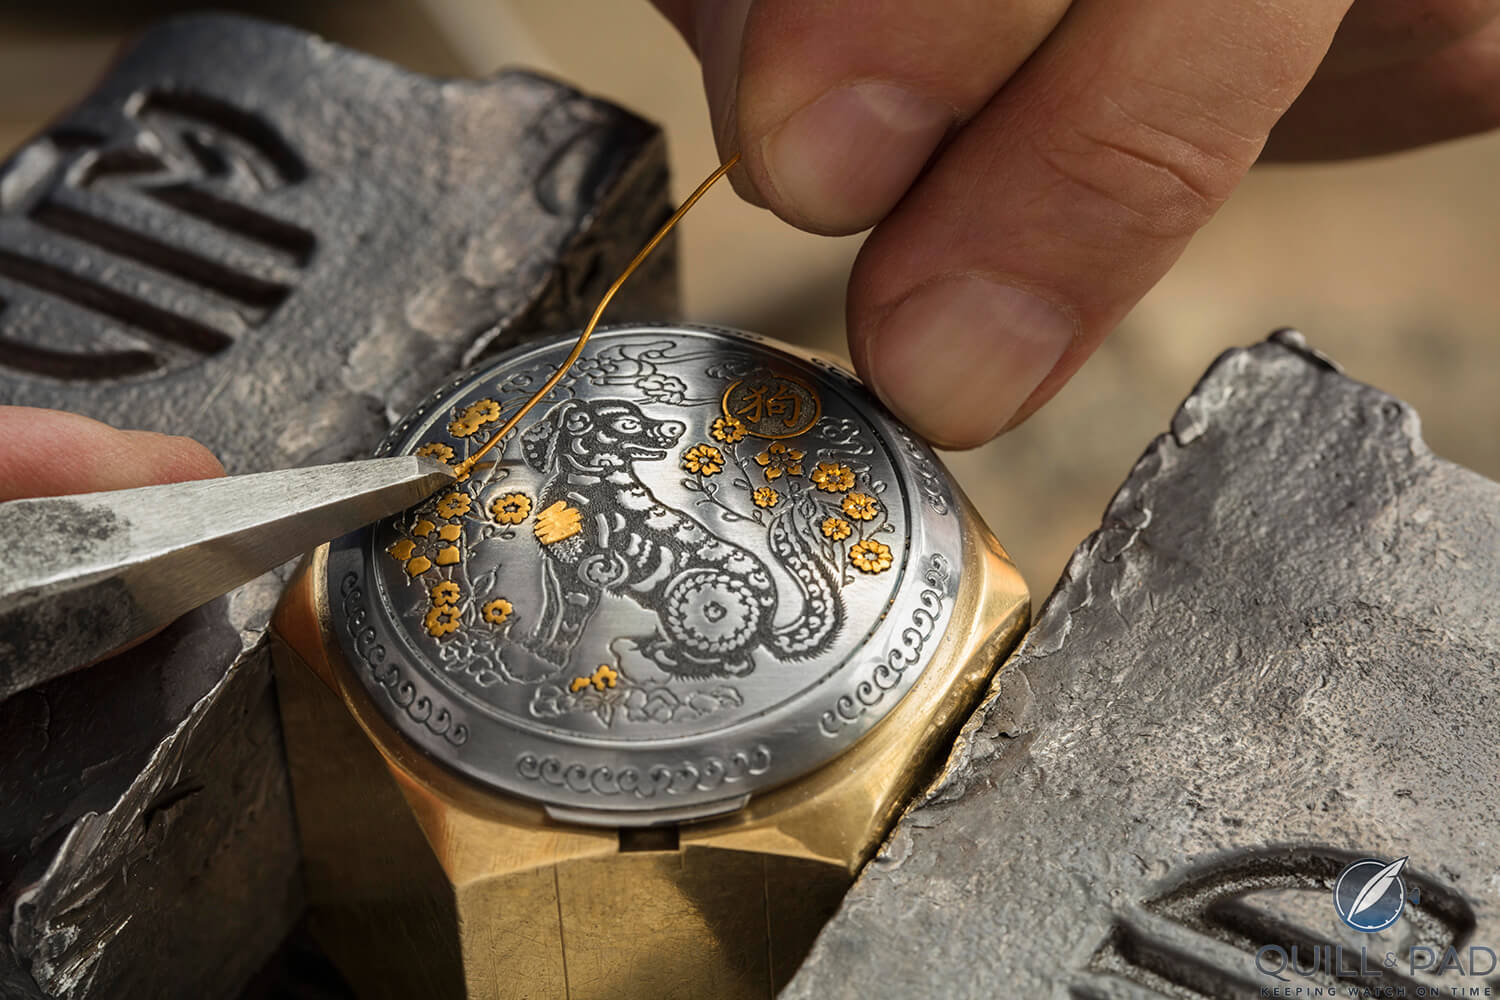 Panerai Acciaio Chinese Year of the Dog gold threads being laid